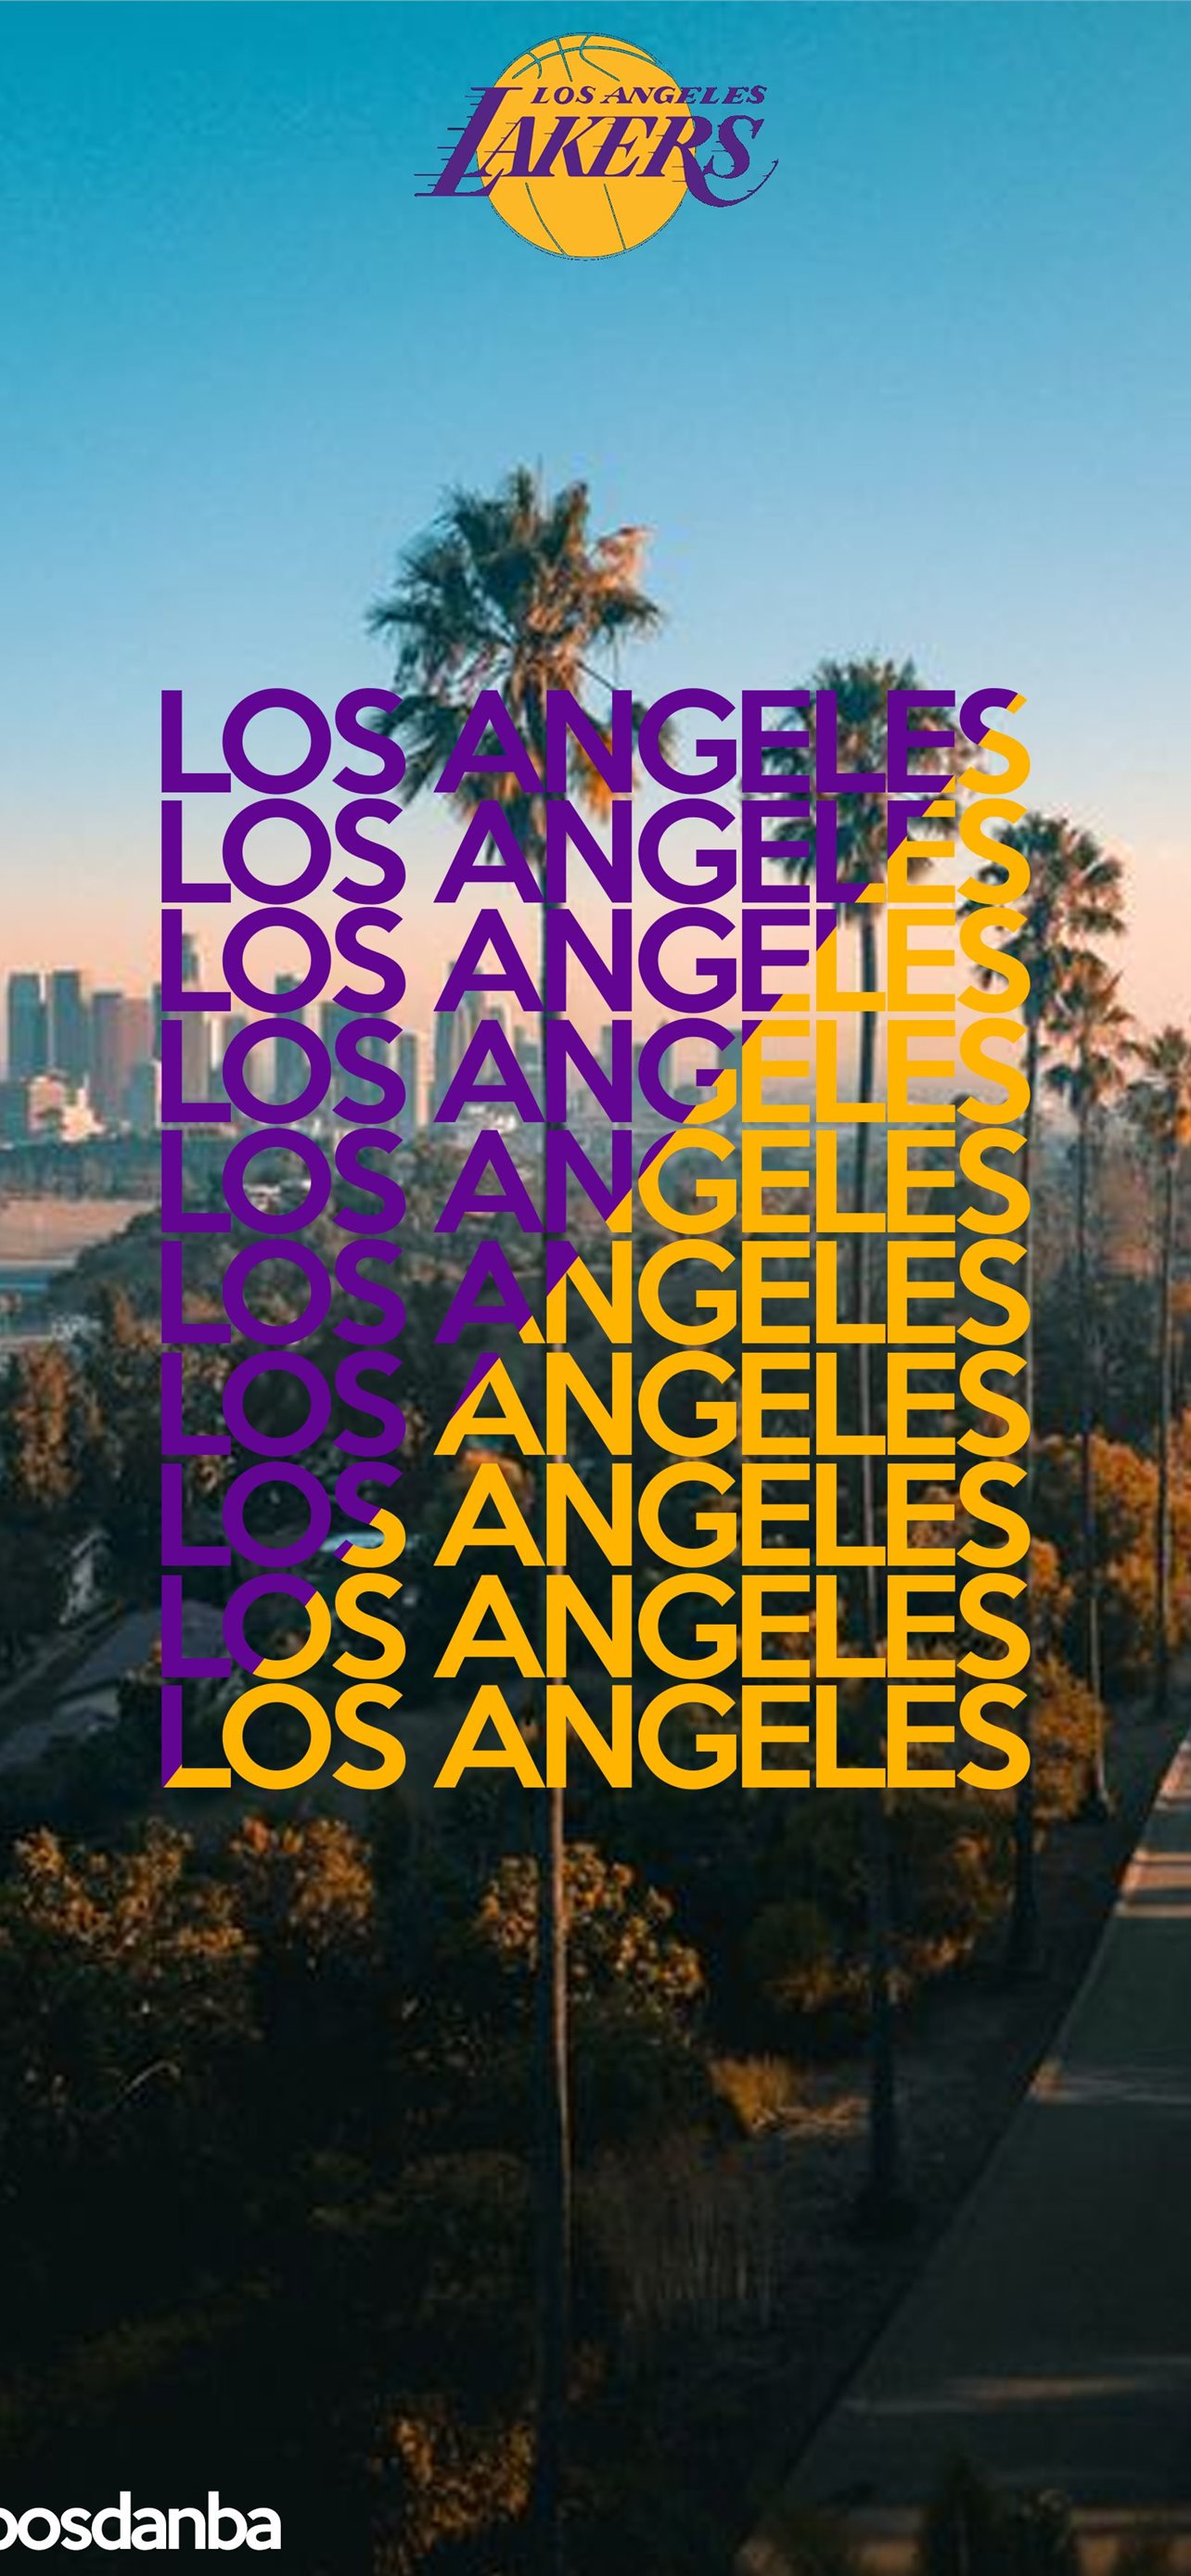 Los Angeles Lakers wallpaper APK for Android Download